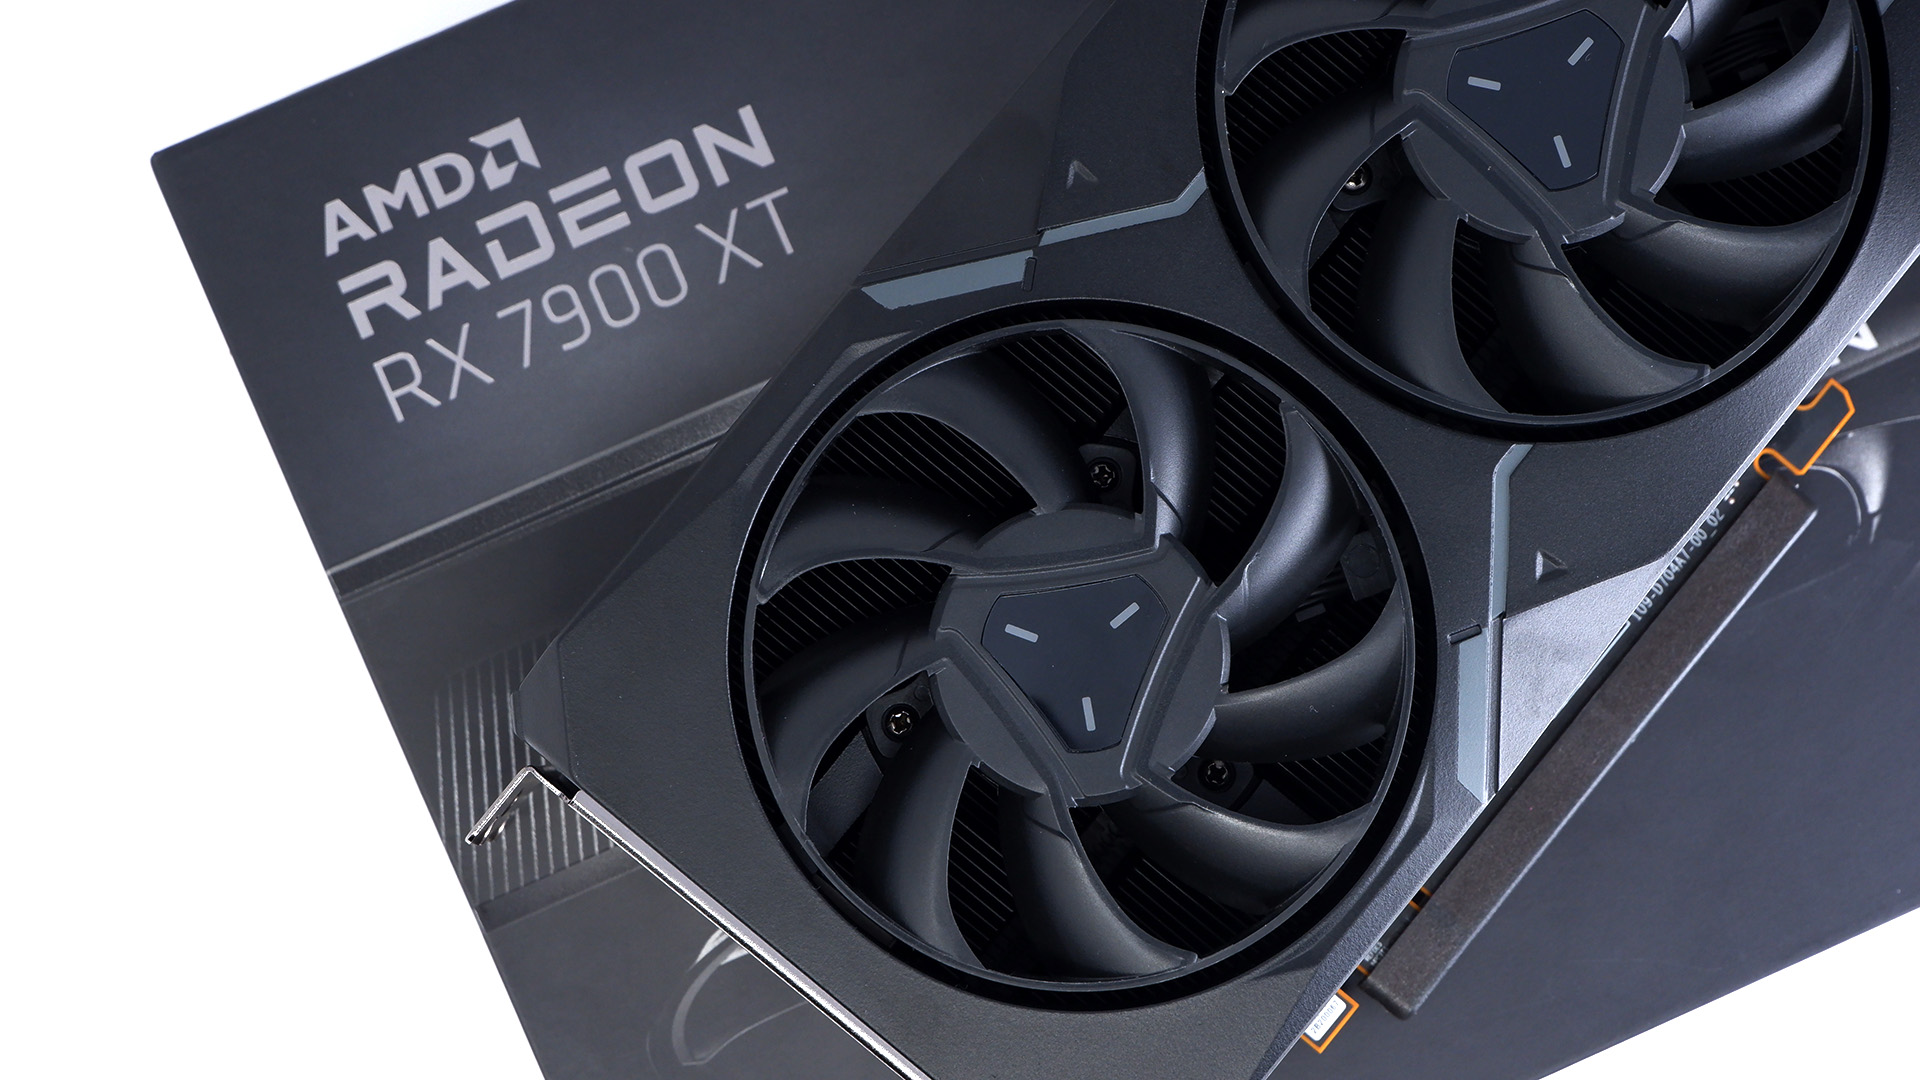 AMD's RX 7900 XT is on sale under MSRP only two months after